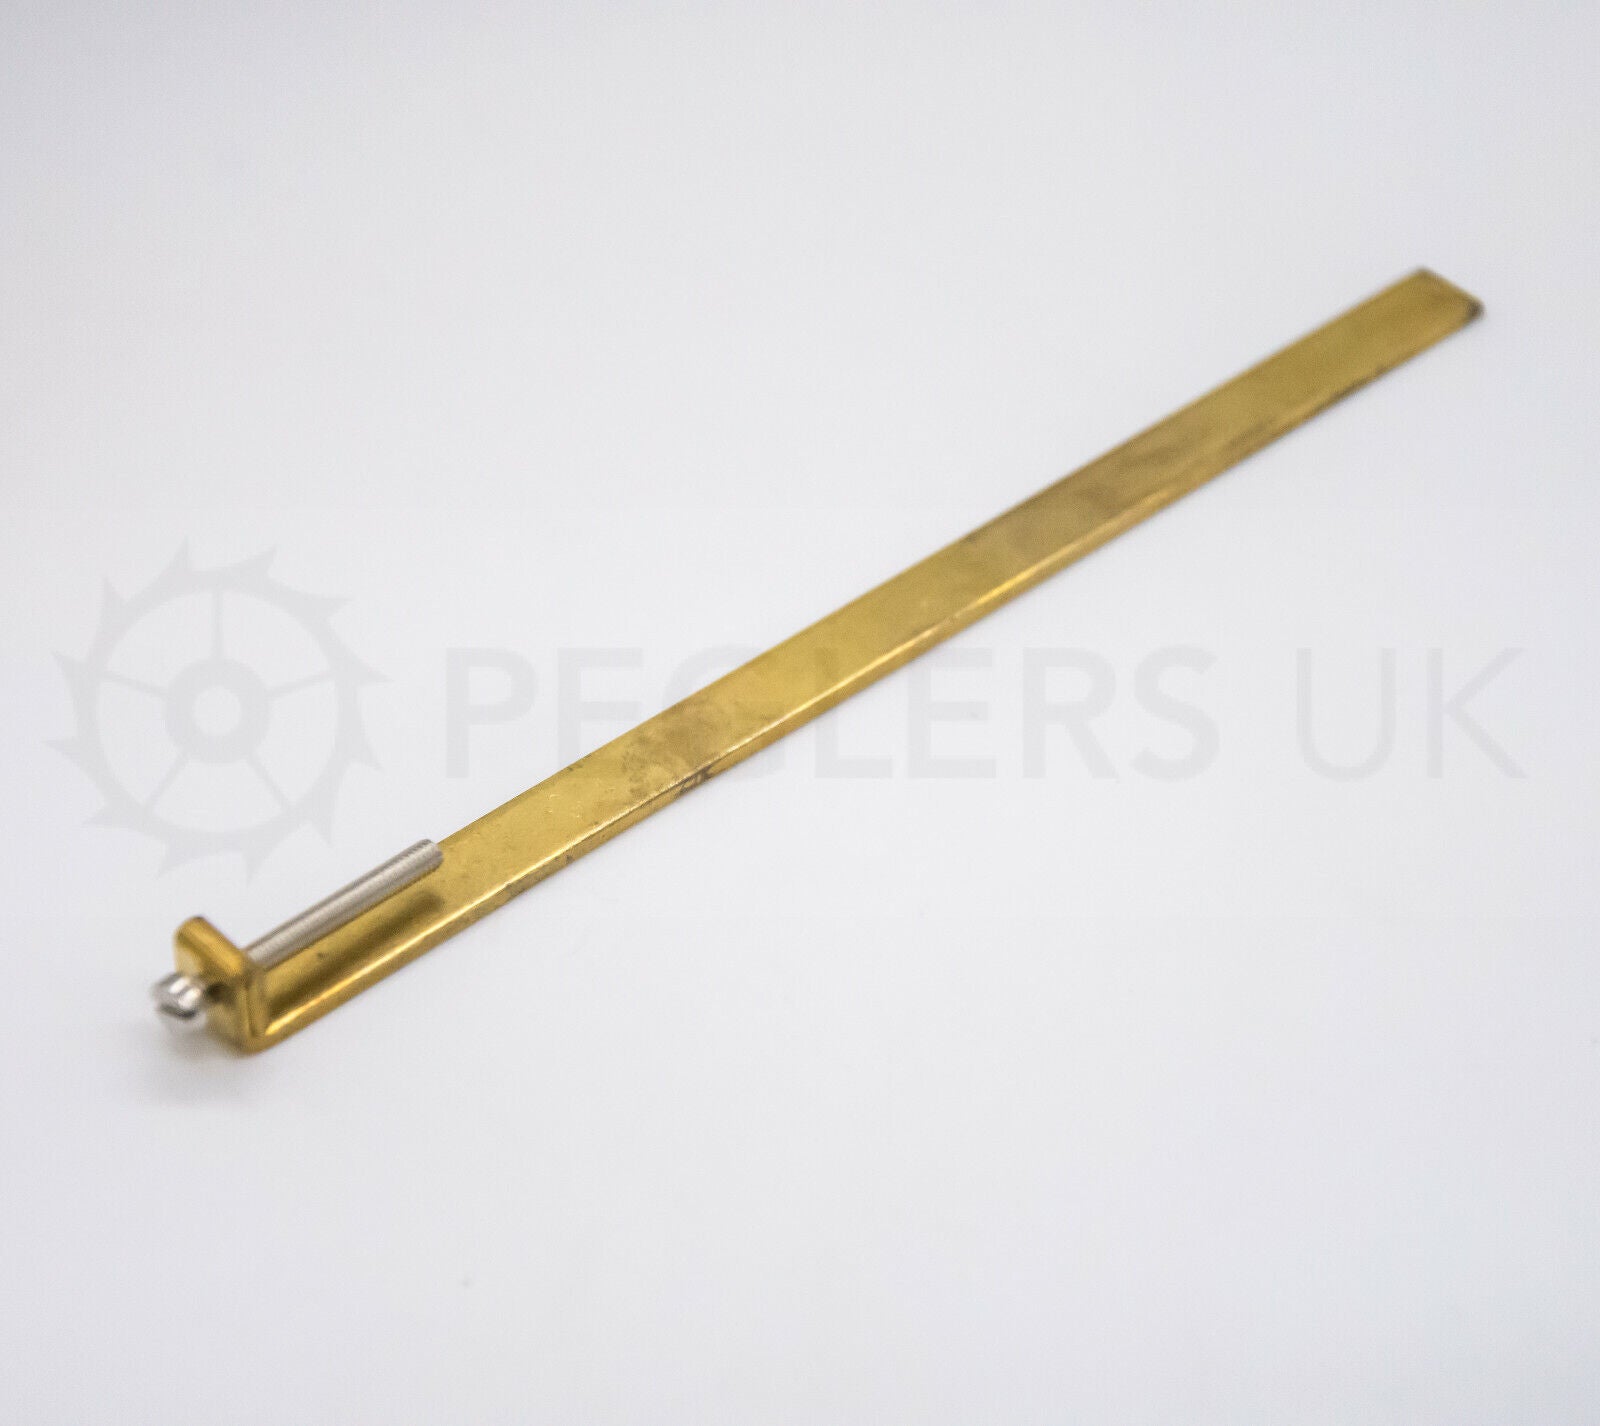 Movement Strap for French Clocks - 140mm